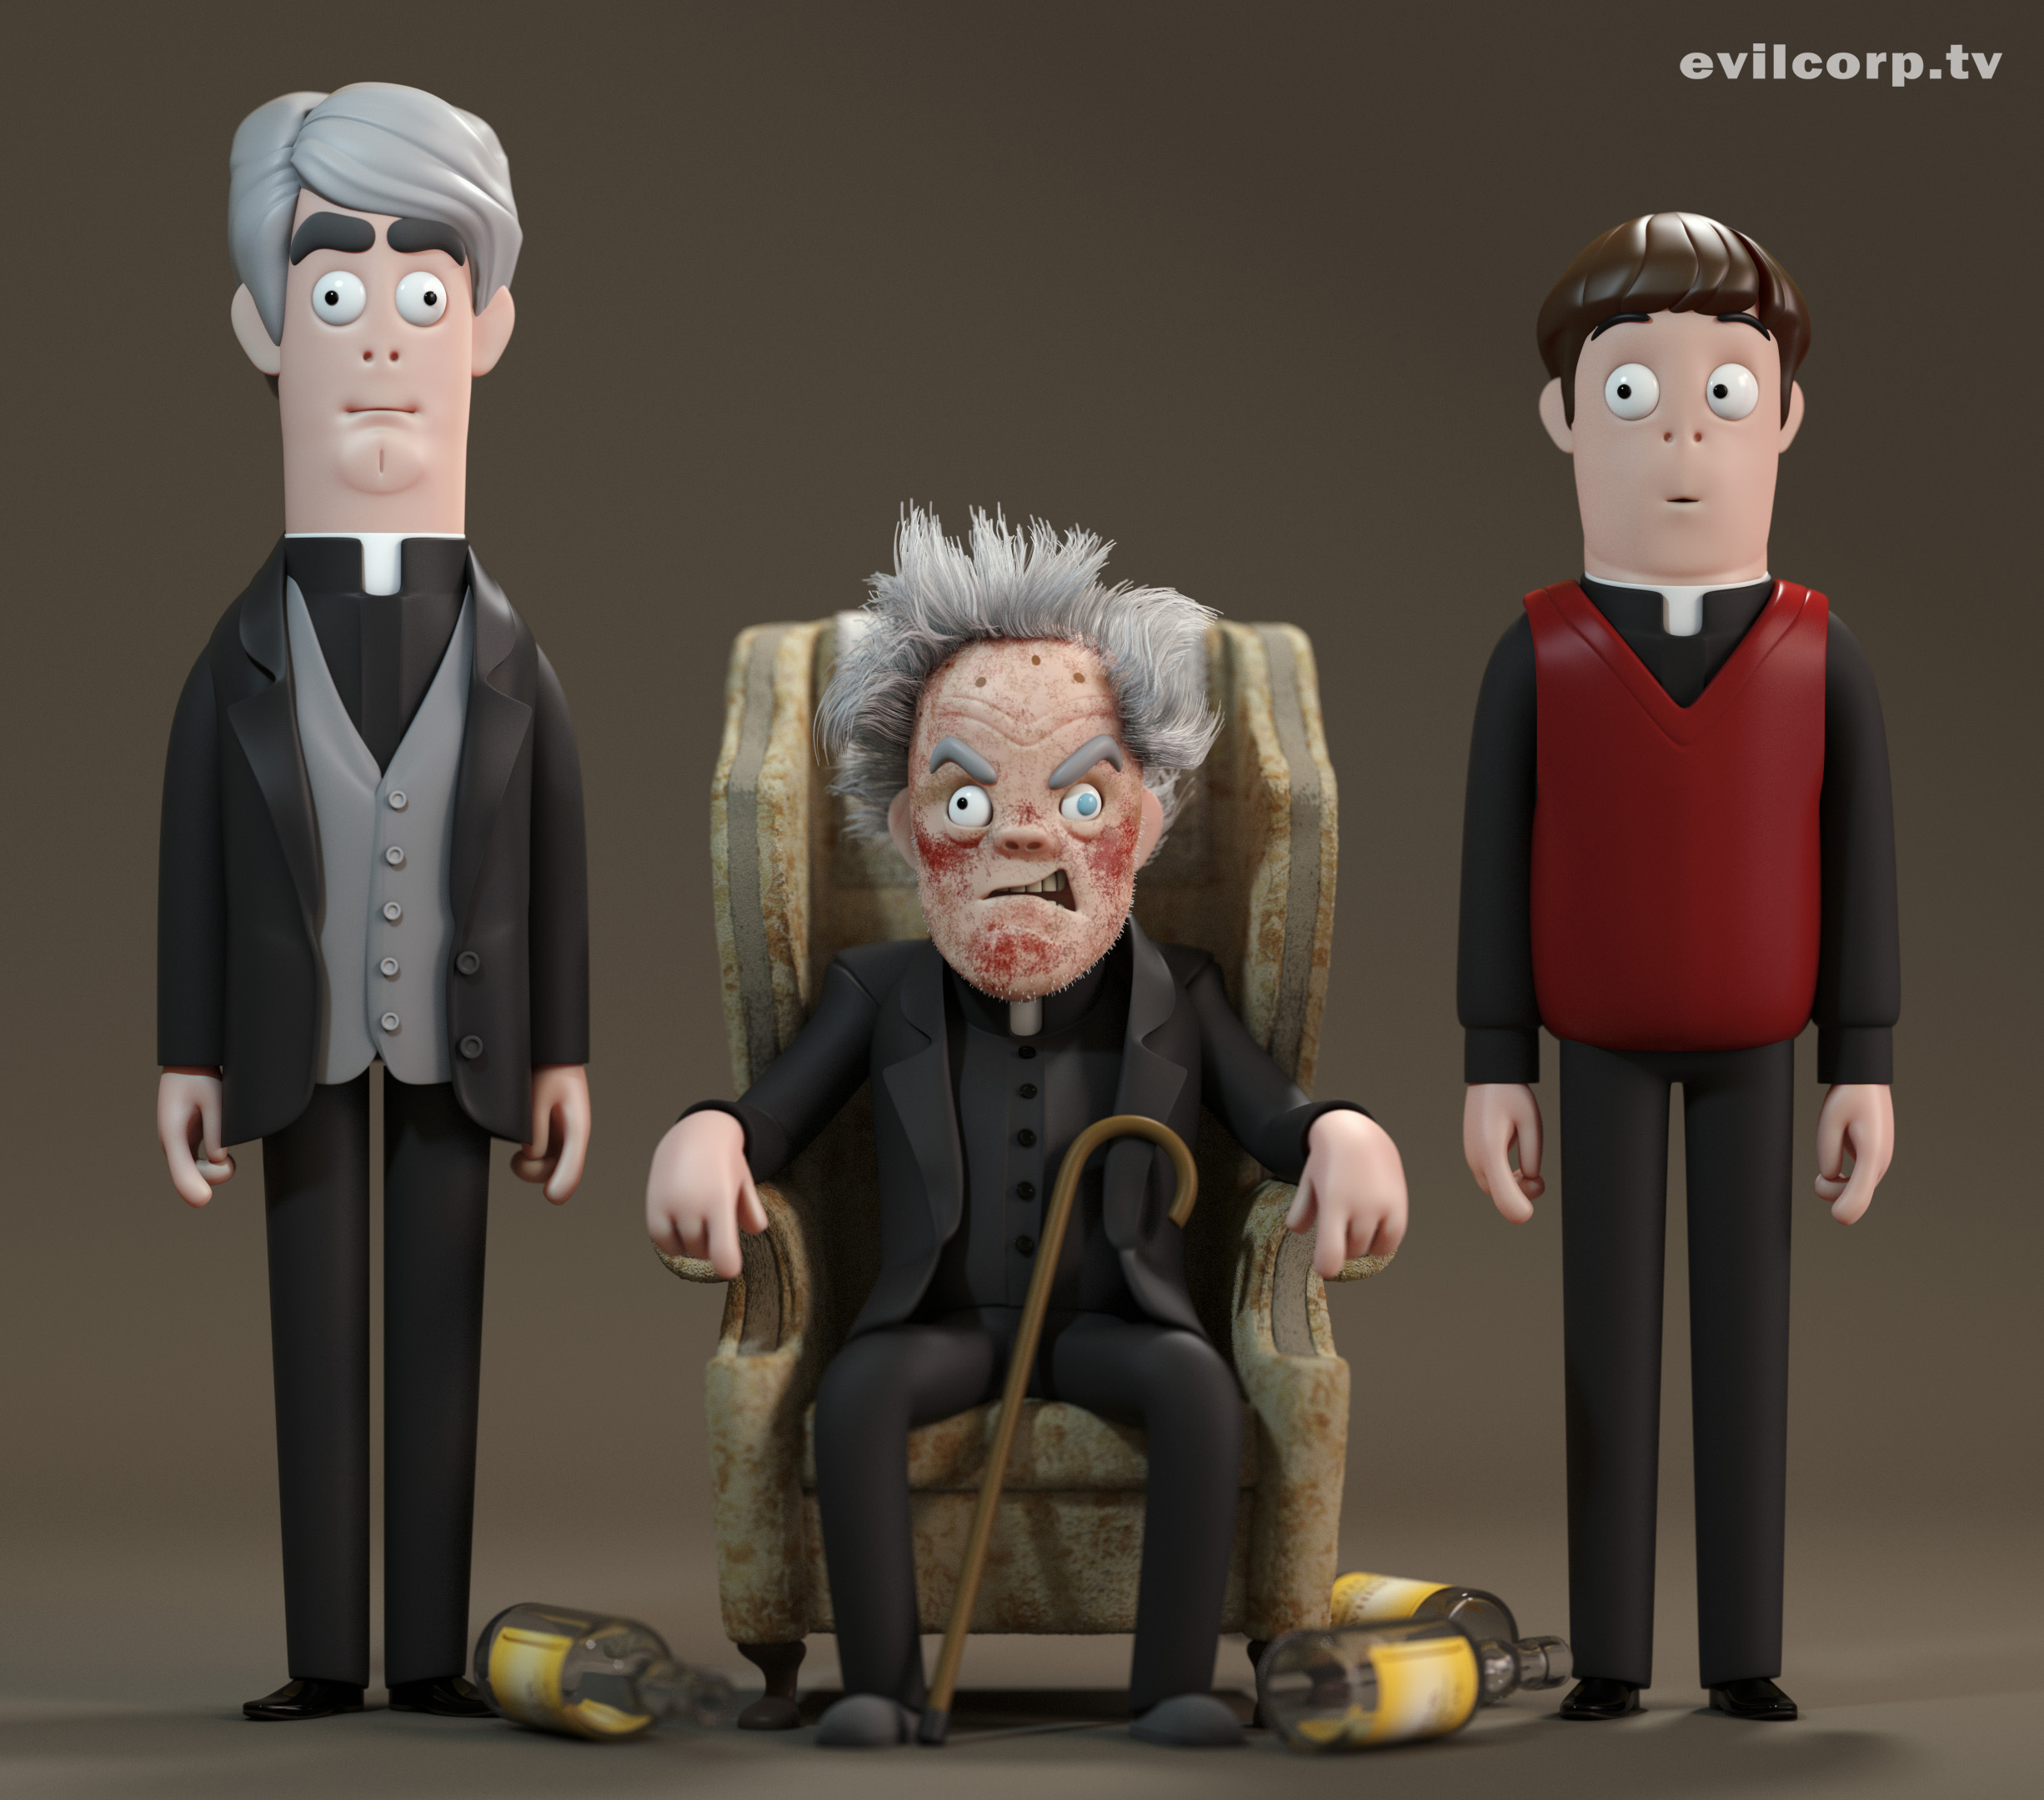 http://www.creativereview.co.uk/images/uploads/2014/10/father_ted_0.jpg